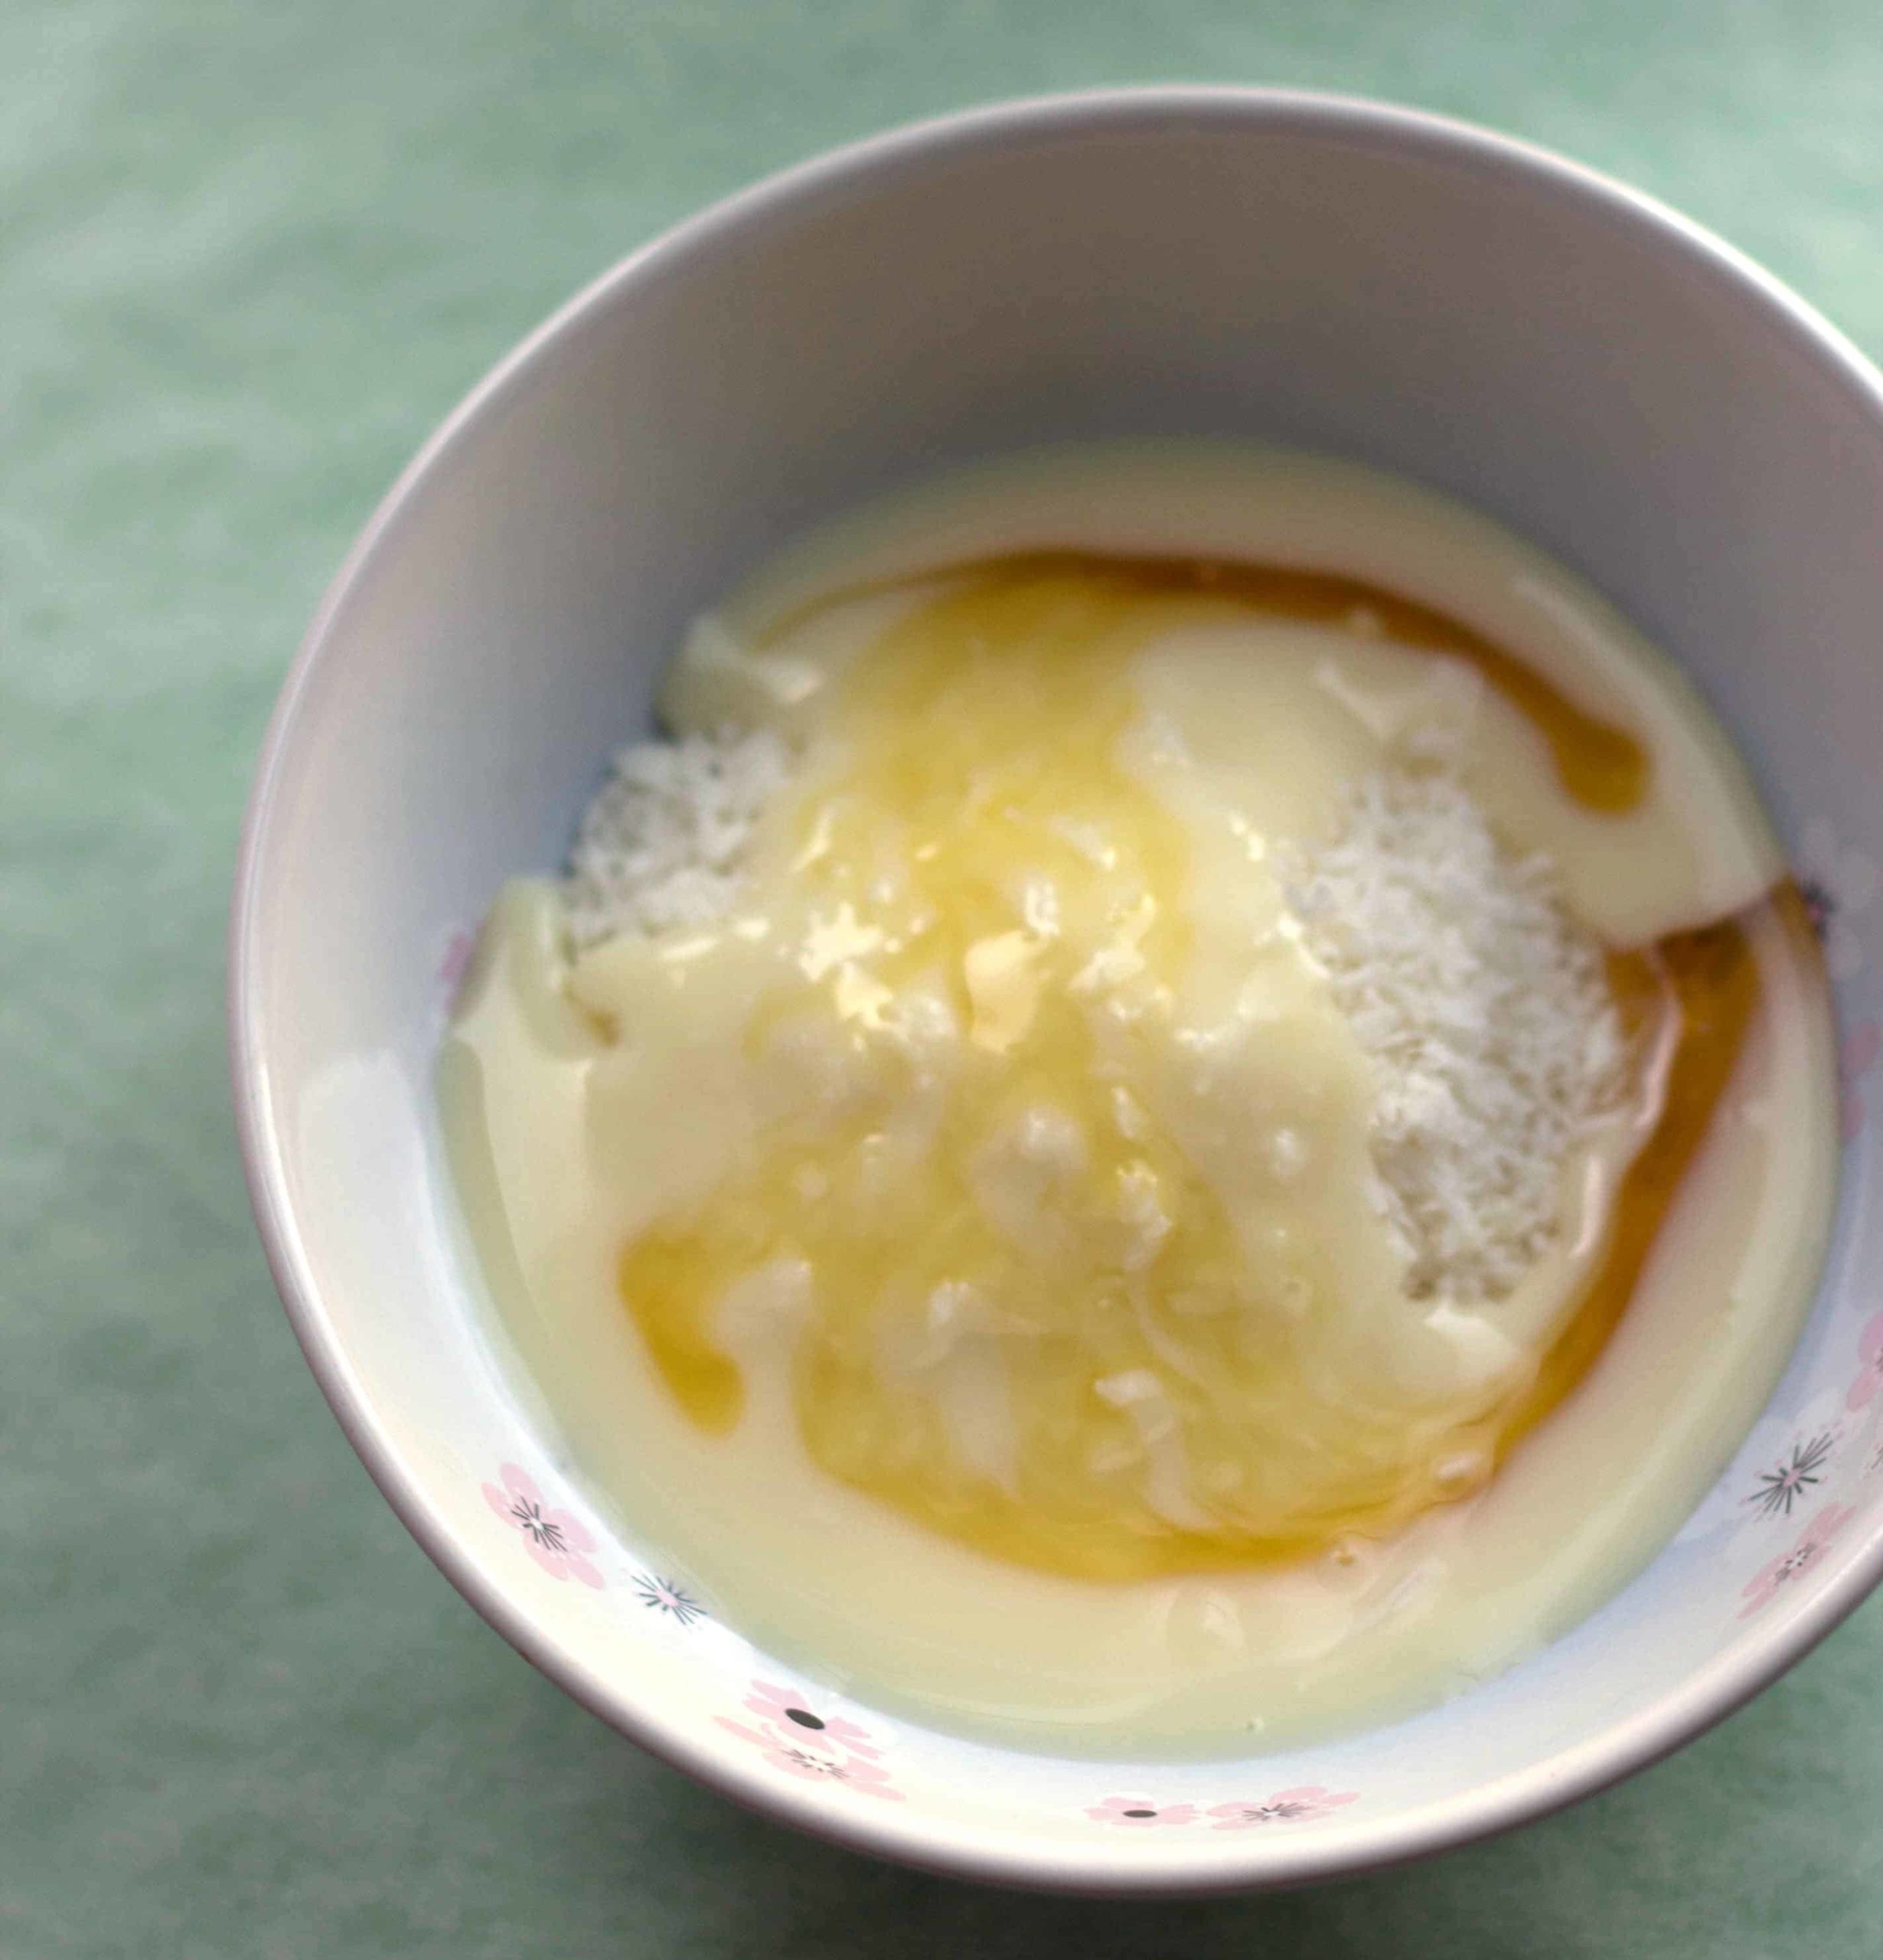 golden syrup, shredded coconut mixed in a bowl